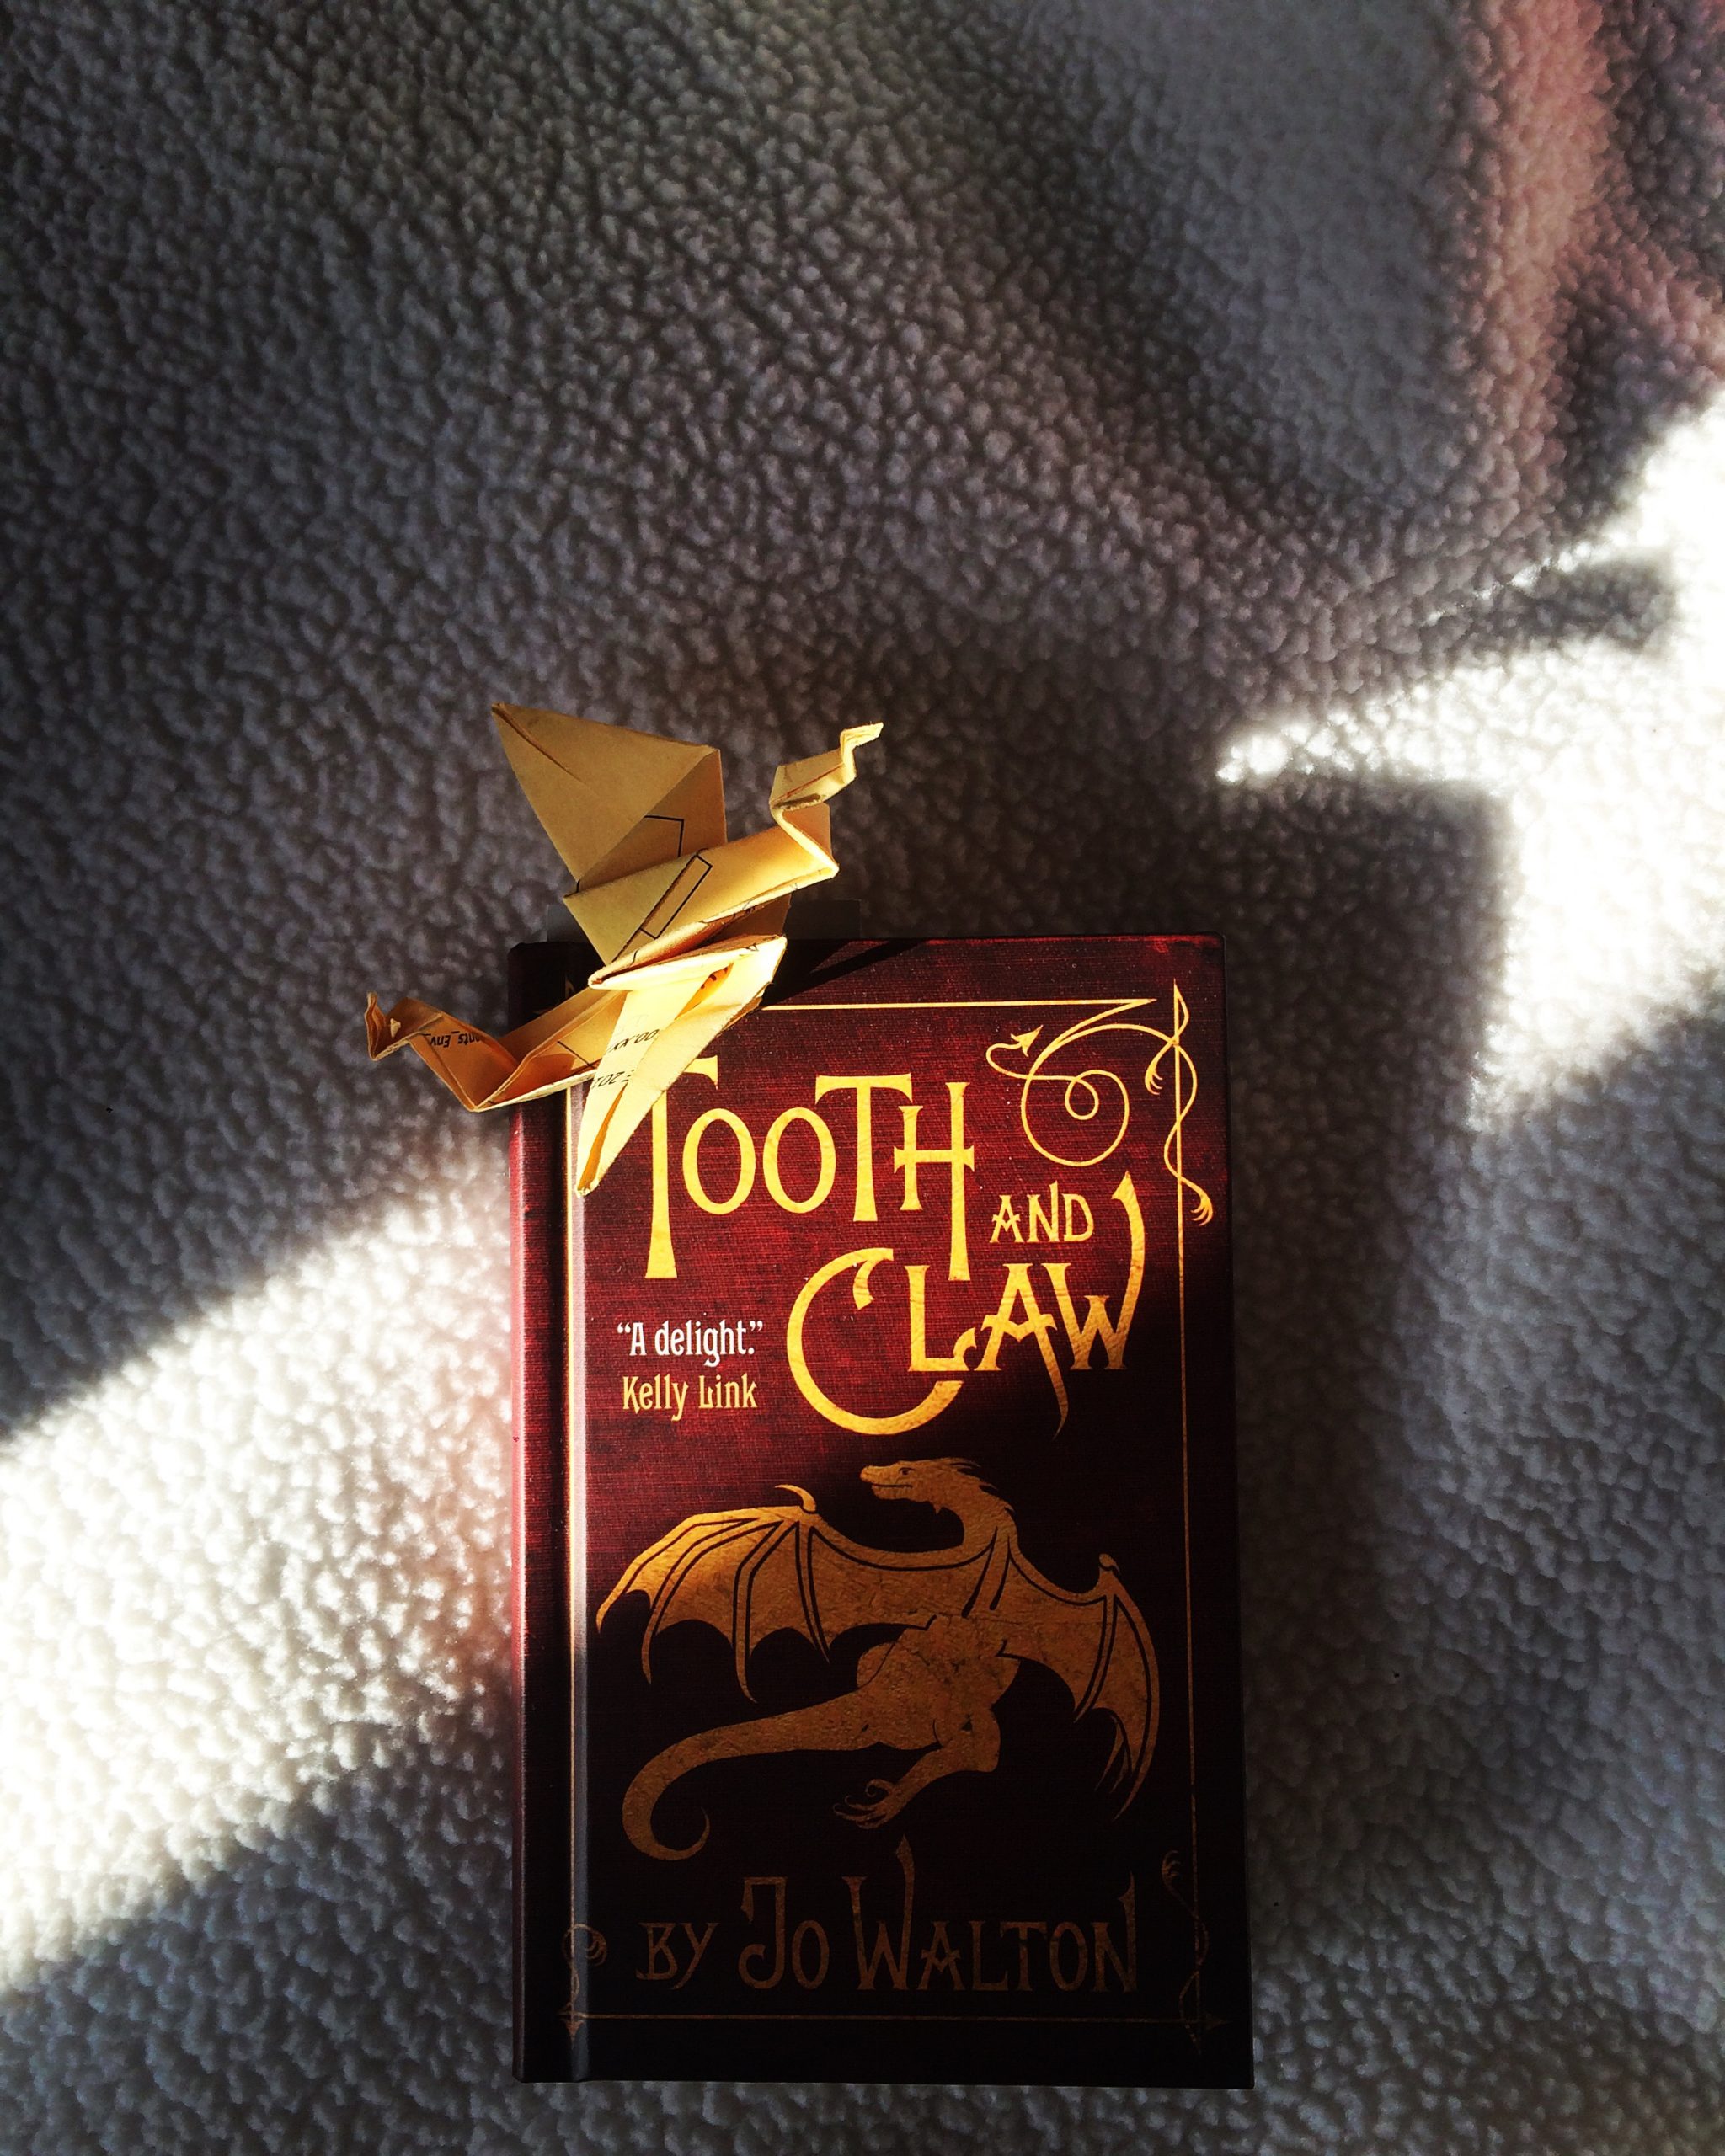 tooth and claw by jo walton